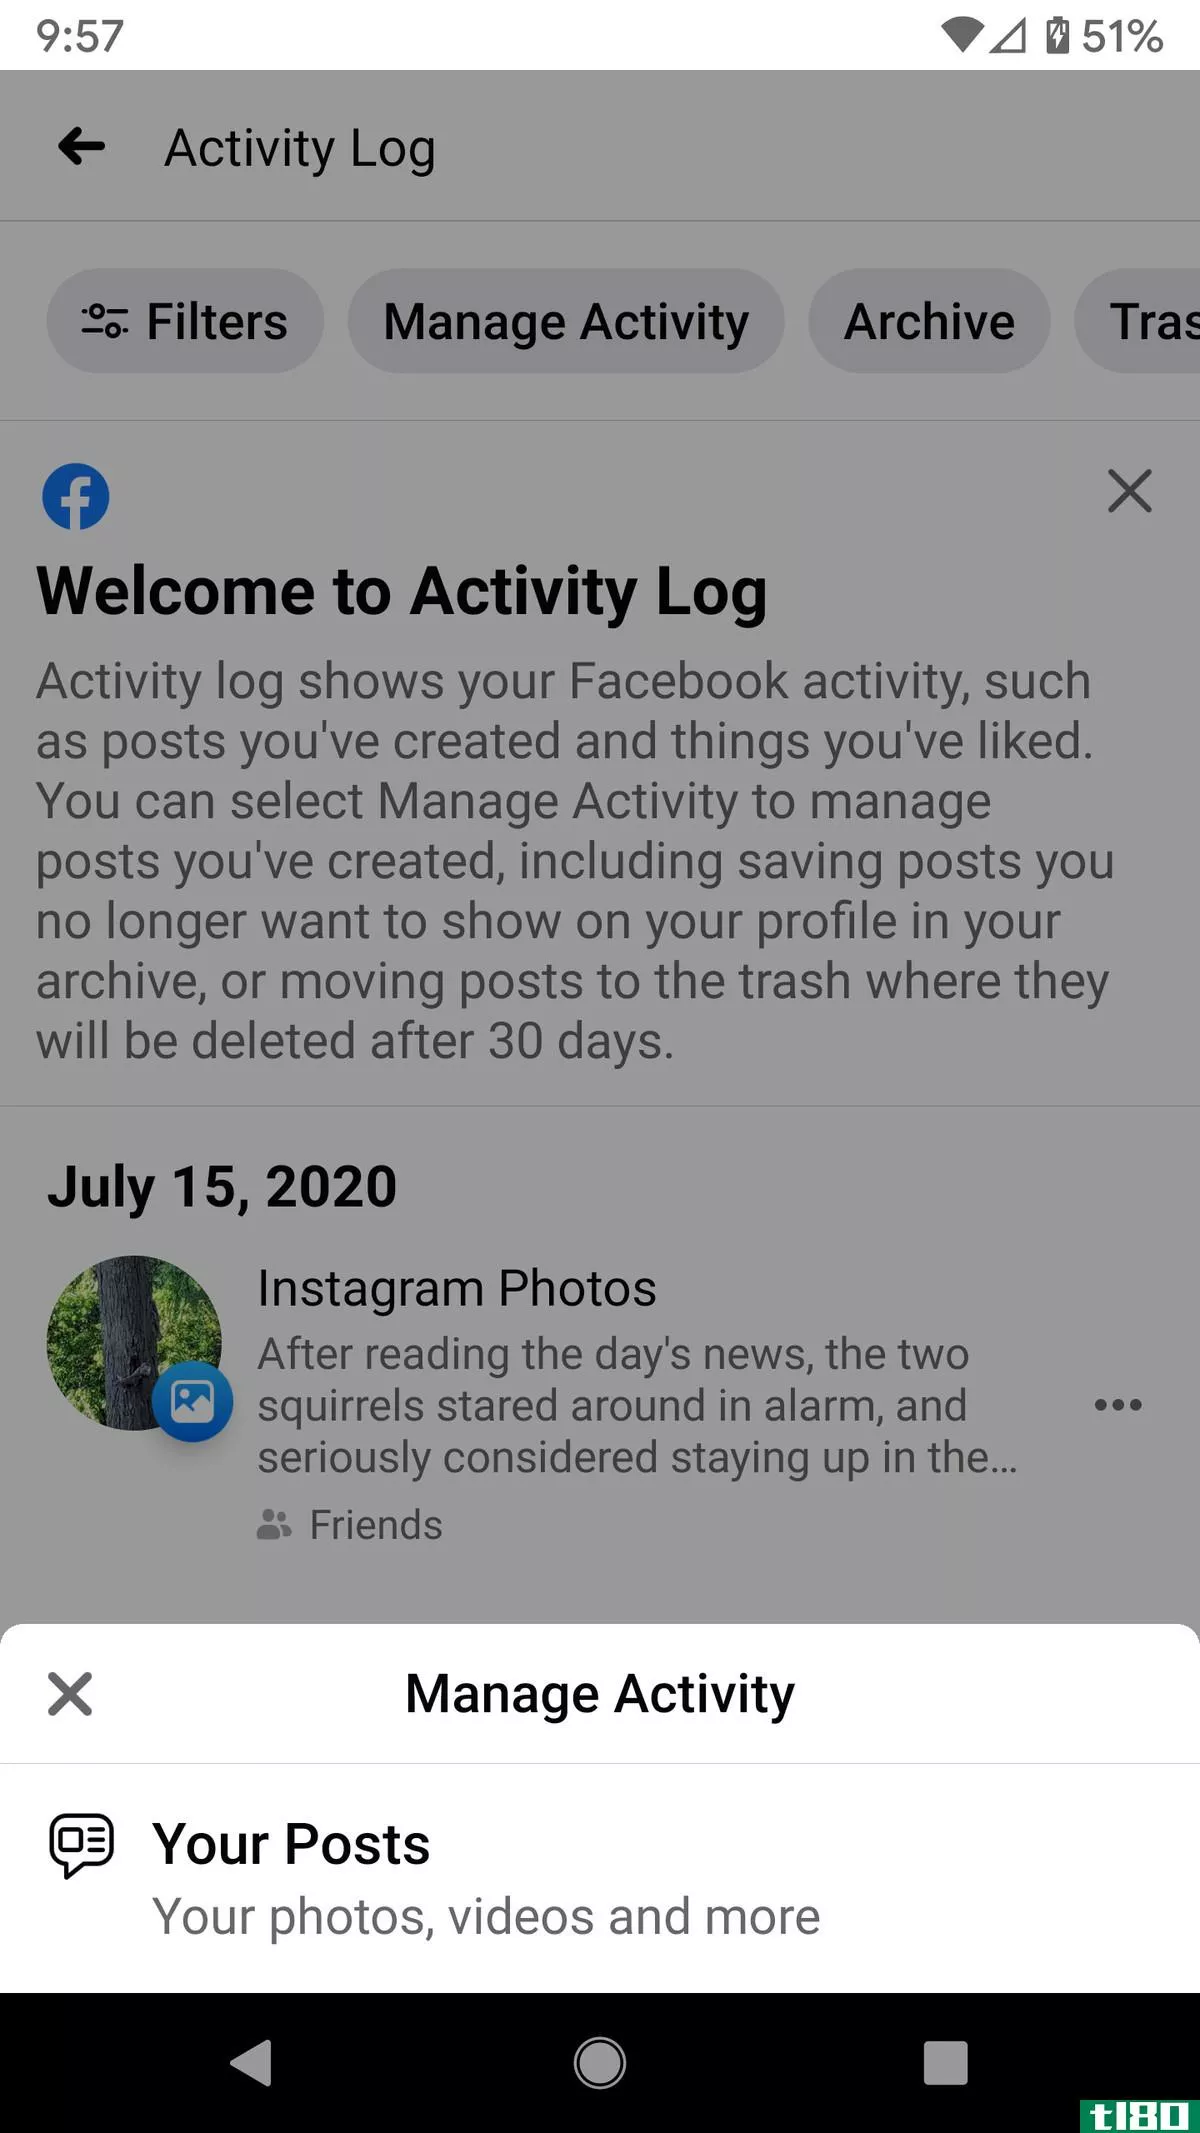 To delete or archive your posts, click on the “Manage Activity” pop-up.